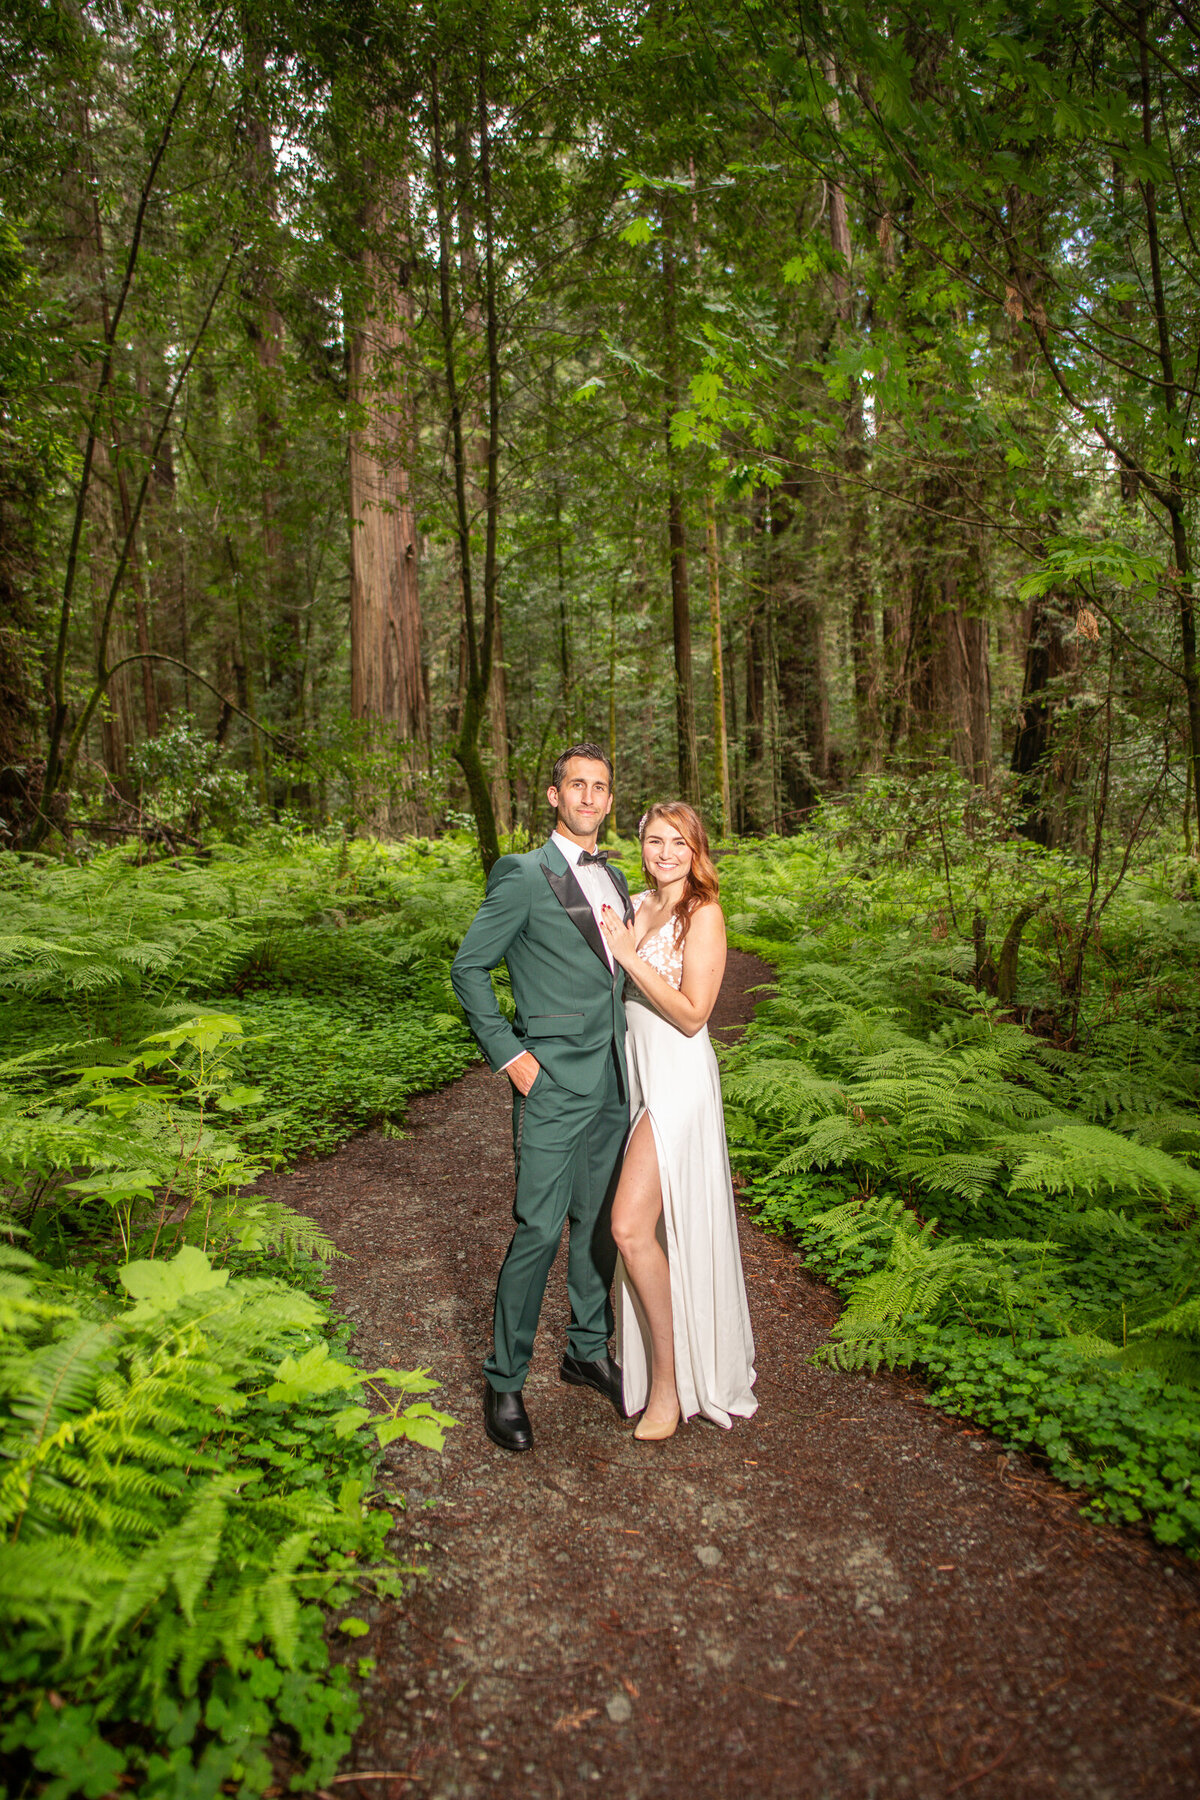 Avenue-of-the-Giants-Redwood-Forest-Elopement-Humboldt-County-Elopement-Photographer-Parky's Pics-9